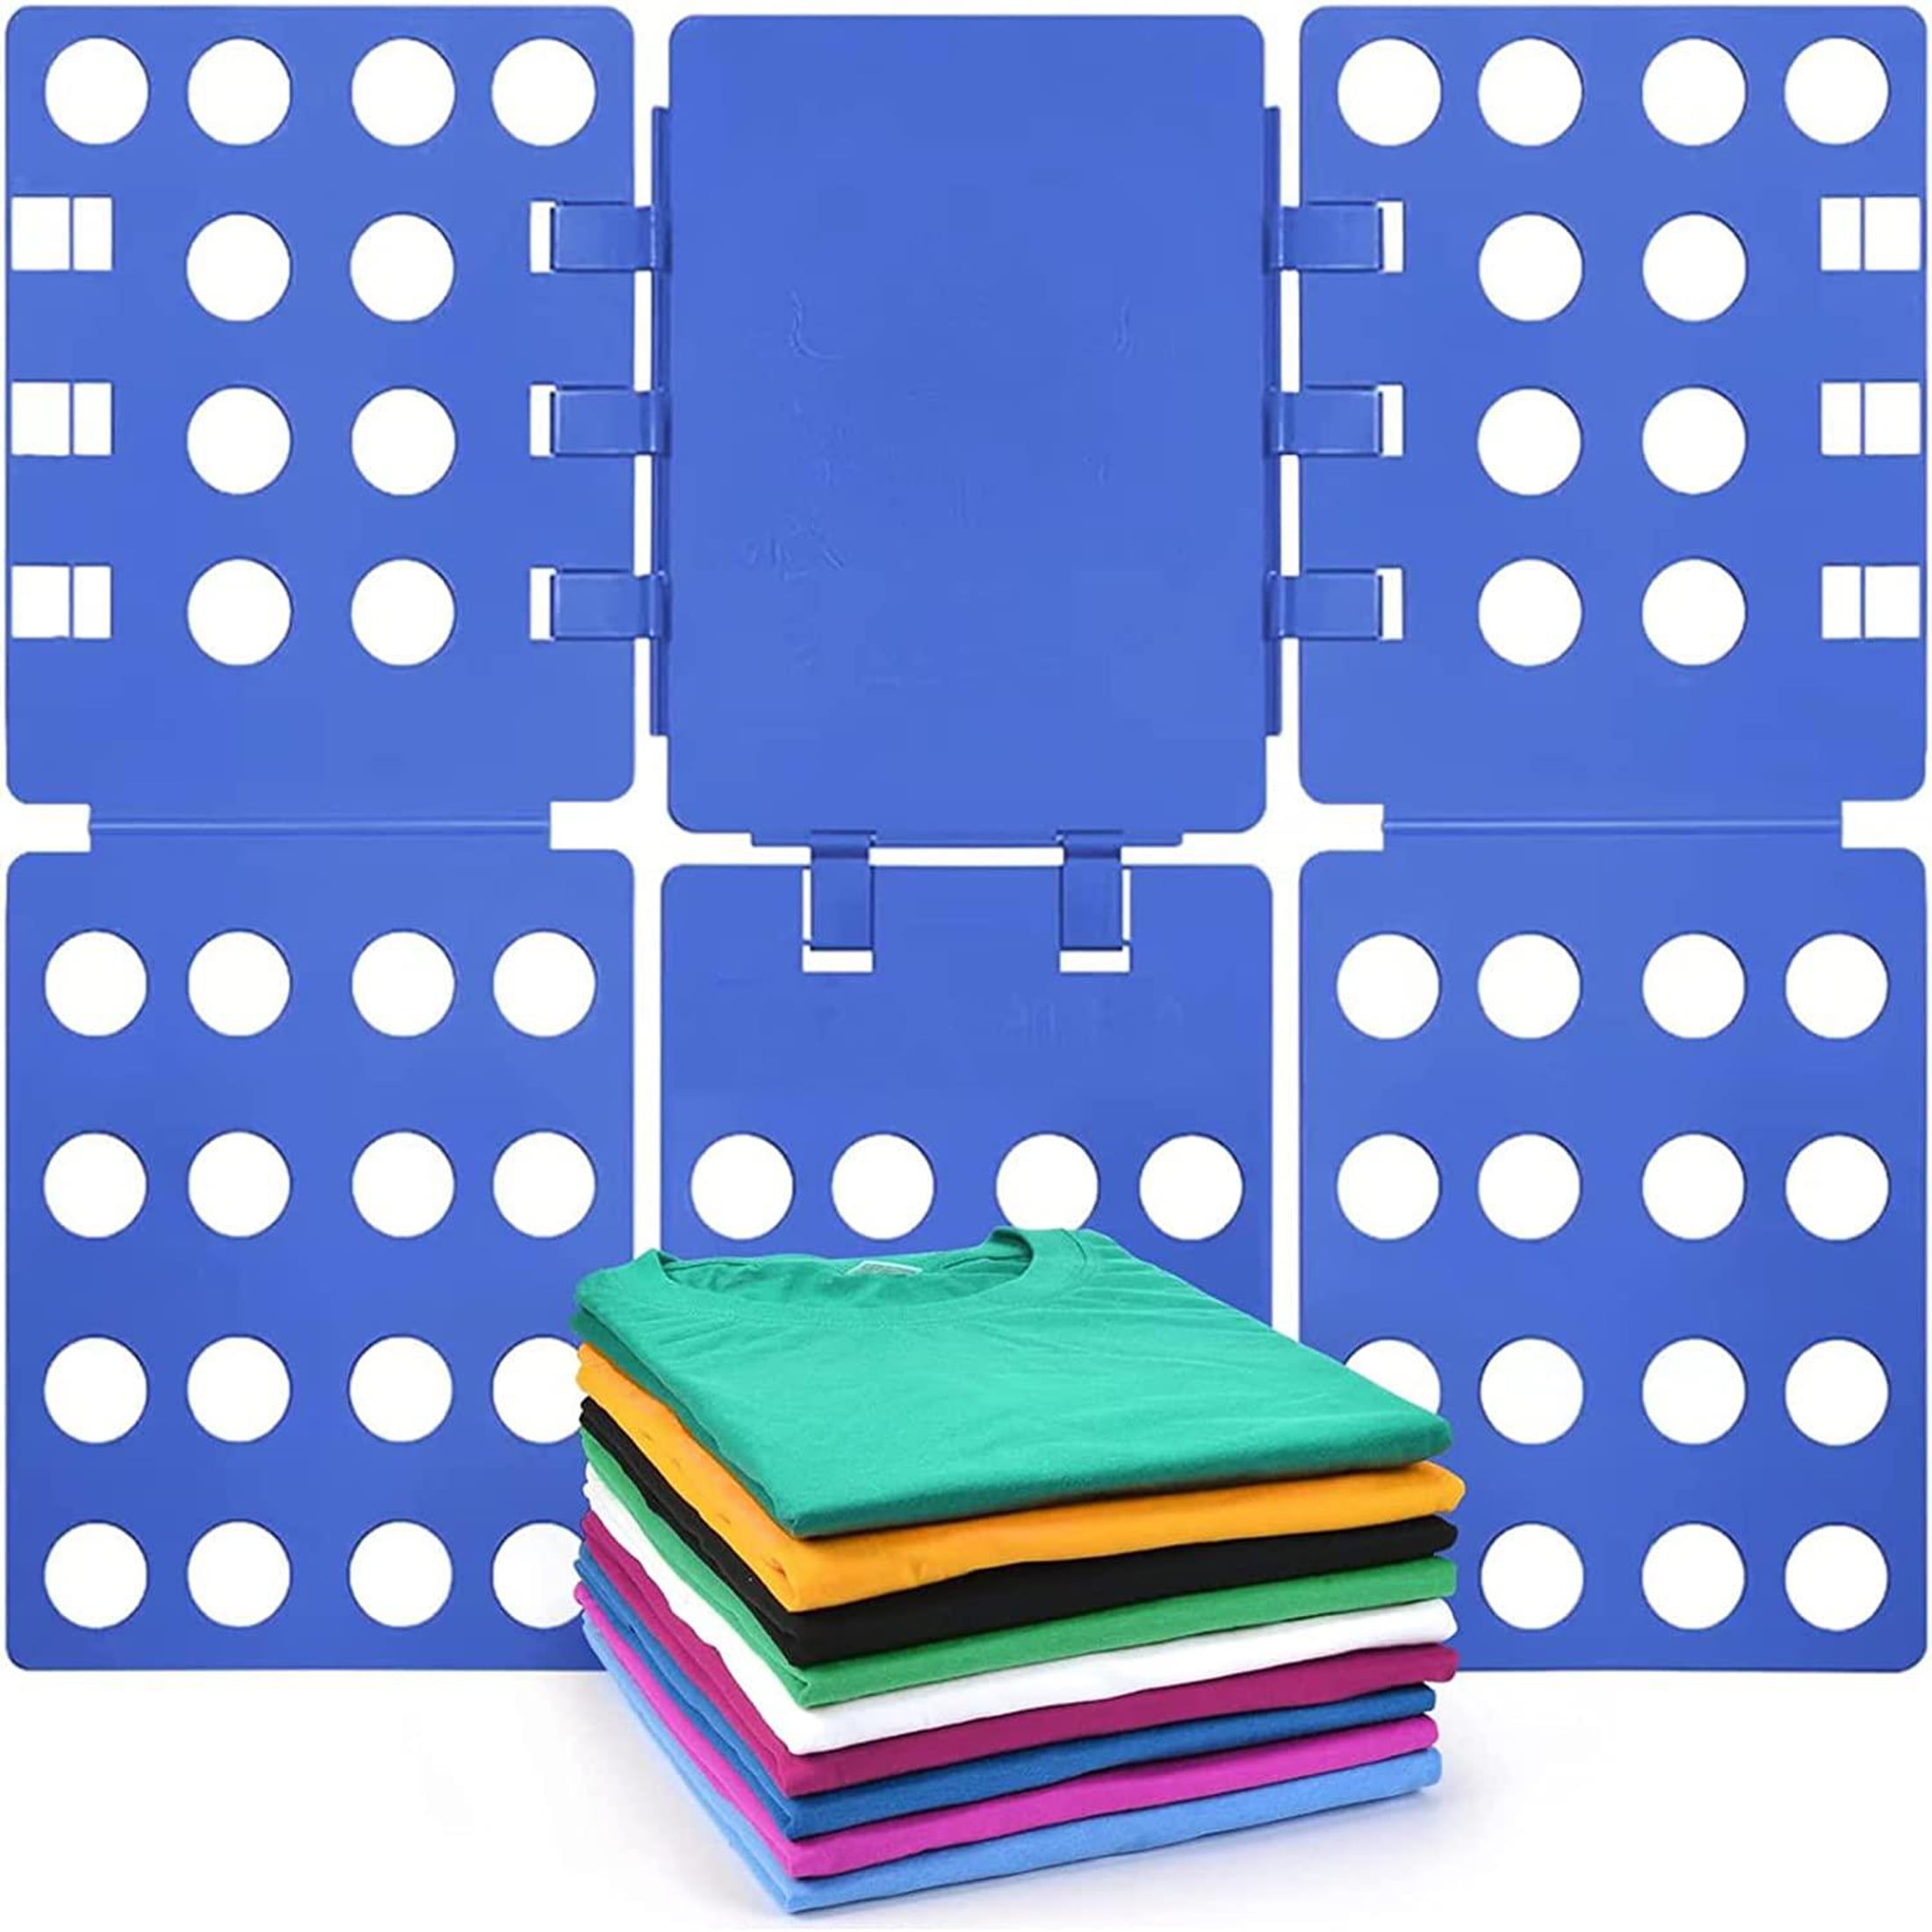 Shirt Folding Board, Available in SM, MED, or LG, Acrylic Hosiery